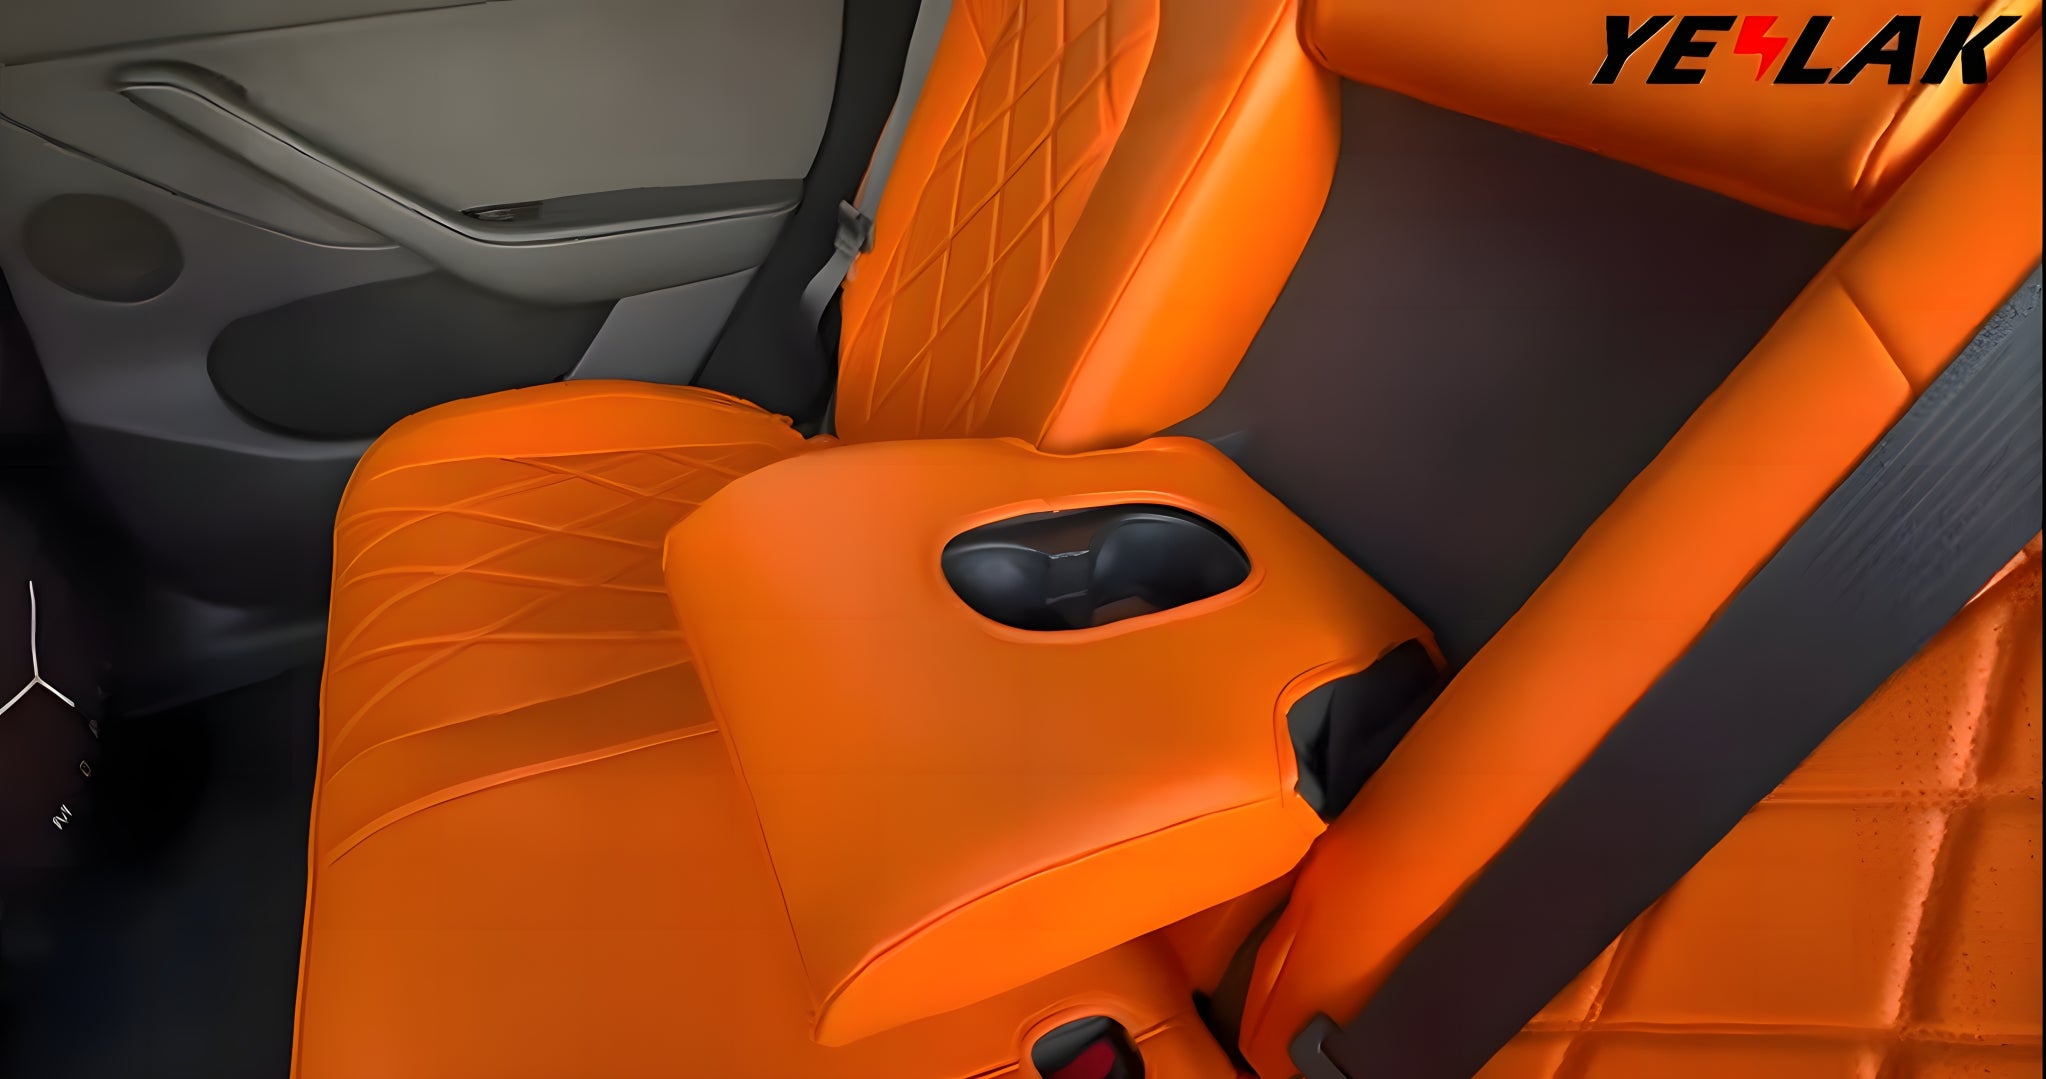 Custom Fit Car Alcan tara Seat Cover For Tesla Model Y 3 Car Accessories  Specific For Tesla Full Covered For 5 Seaters Orange - AliExpress